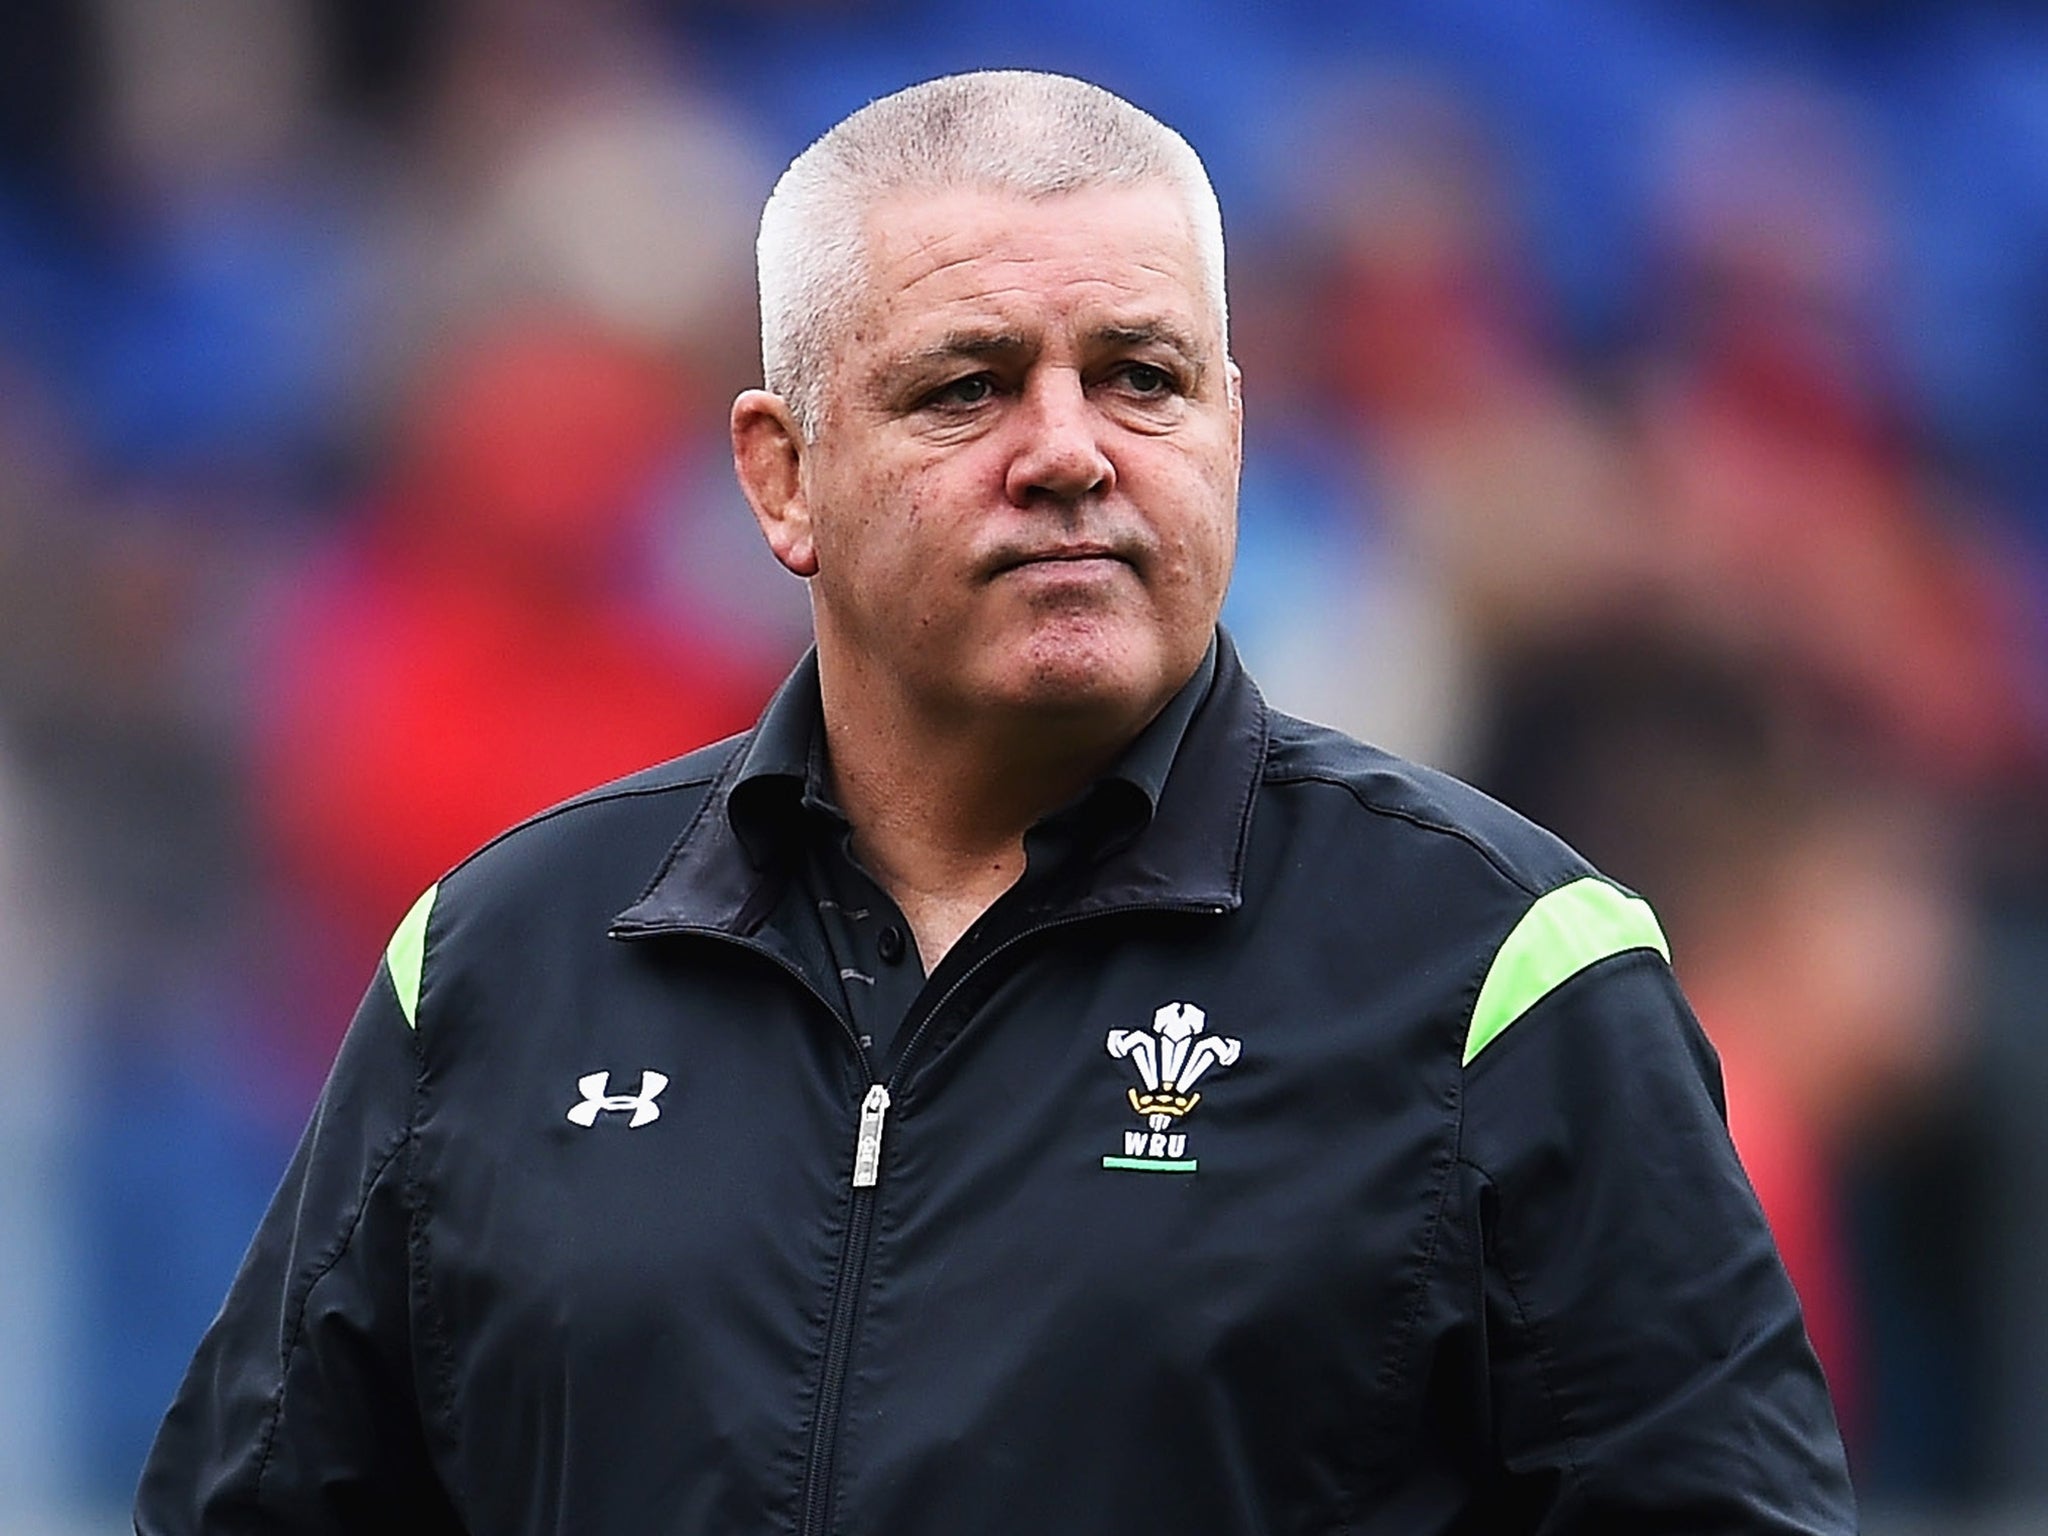 Wales coach Warren Gatland has announced his 47-man training squad for the World Cup